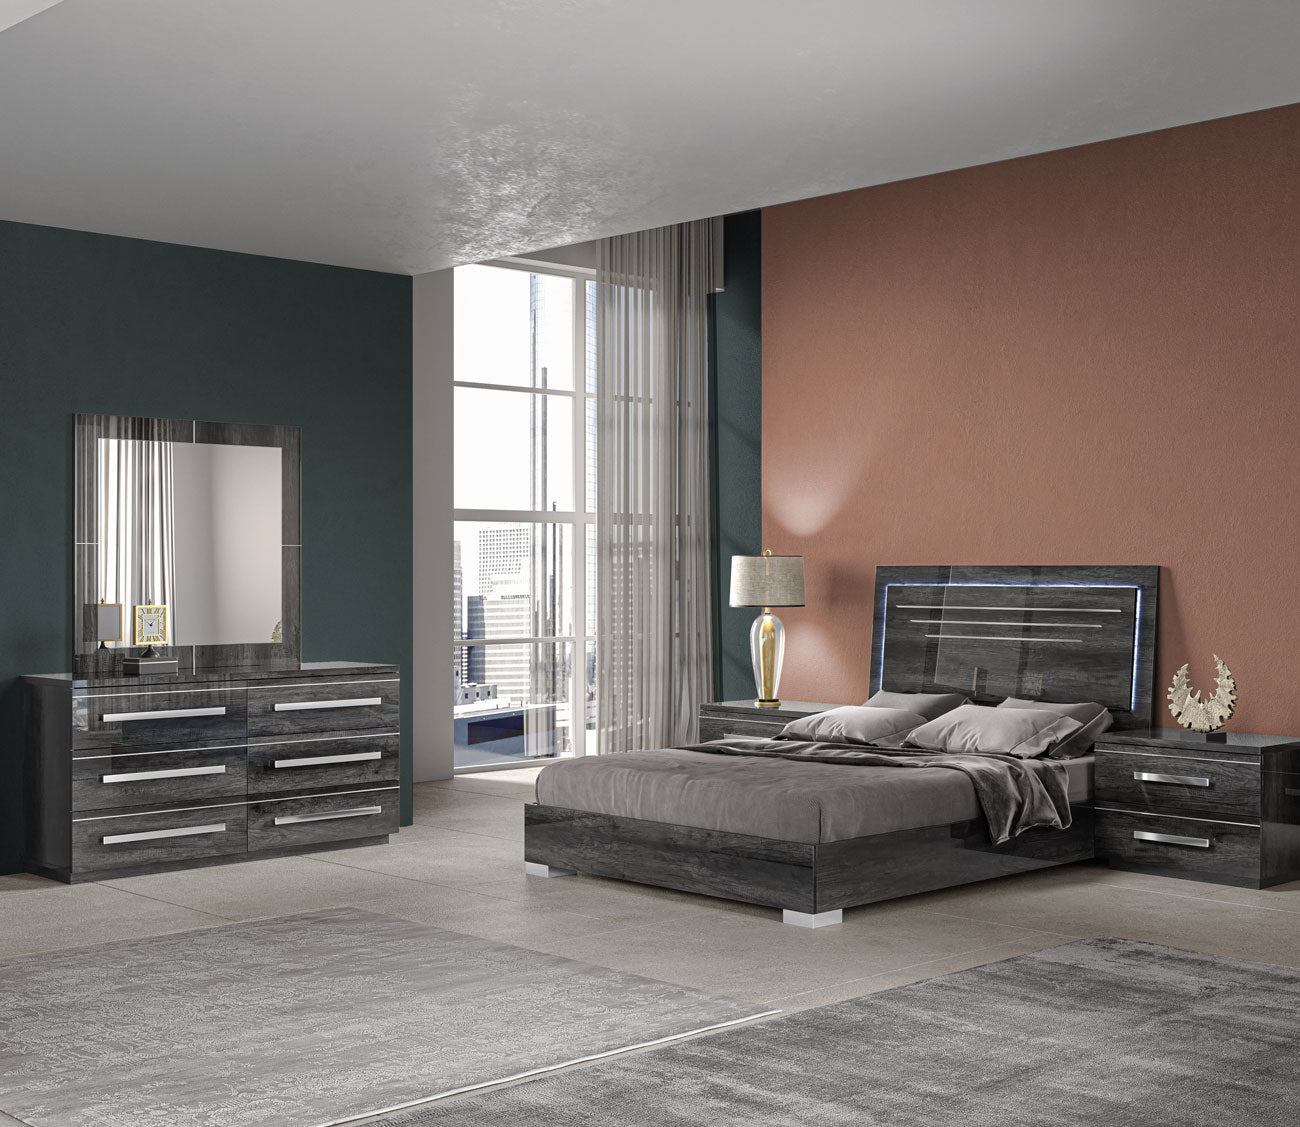 Palermo Palmi Lacquered 6-Drawer Dresser by NCA Designs